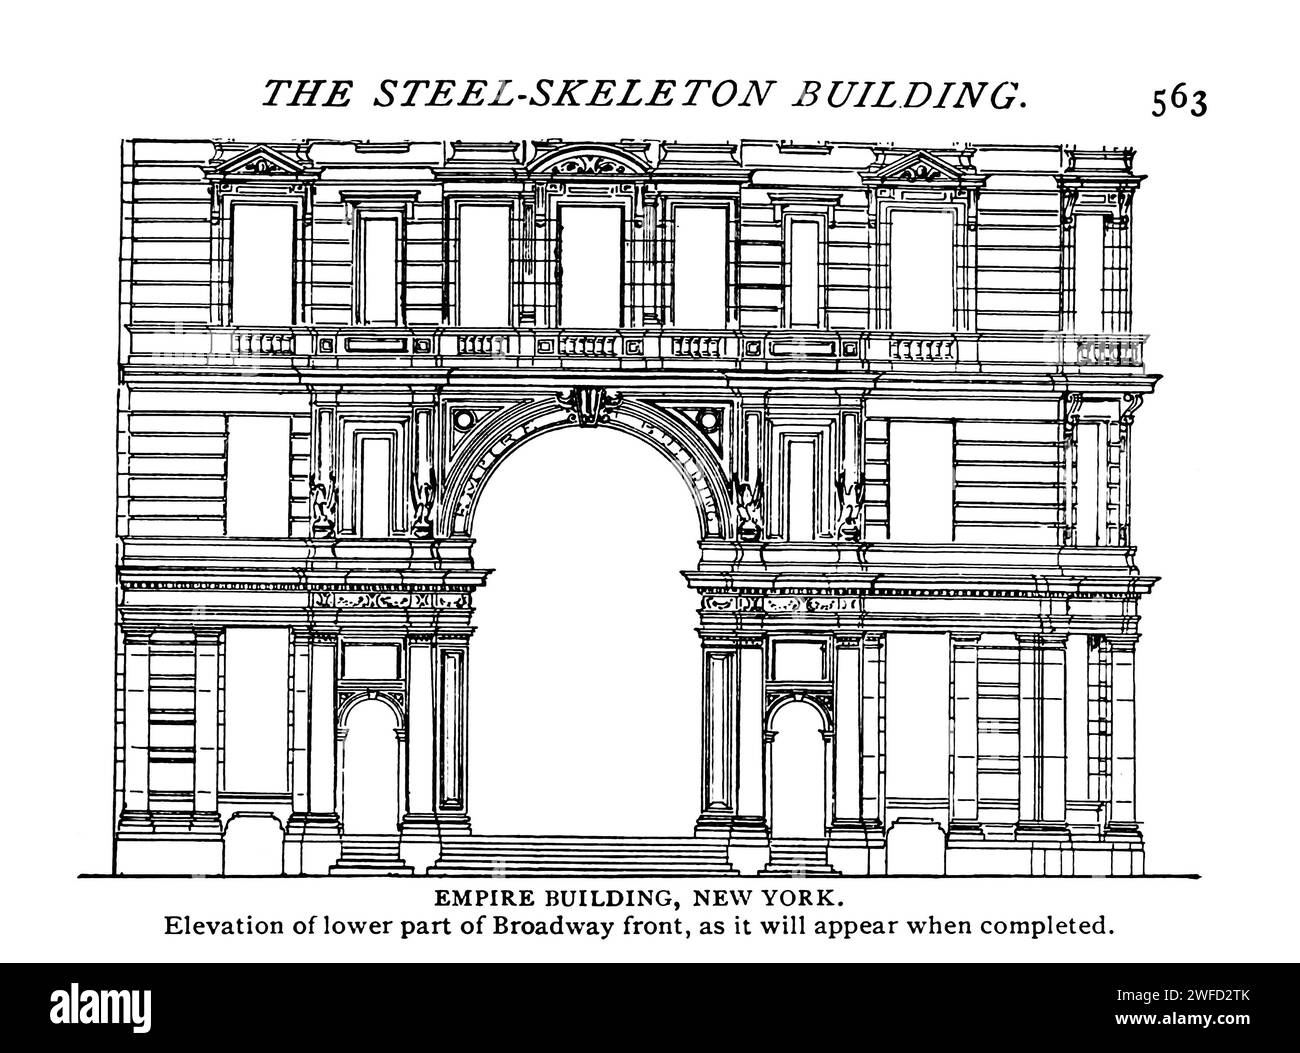 Empire Building, New York, Elevation of lower part of Broadway front, as it will appear when completed. from the Article THE ARCHITECTURAL RELATIONS OF THE STEEL-SKELETON BUILDING.By F. H. Kimball. from The Engineering Magazine Devoted to Industrial Progress Volume XI October 1897 The Engineering Magazine Co Stock Photo